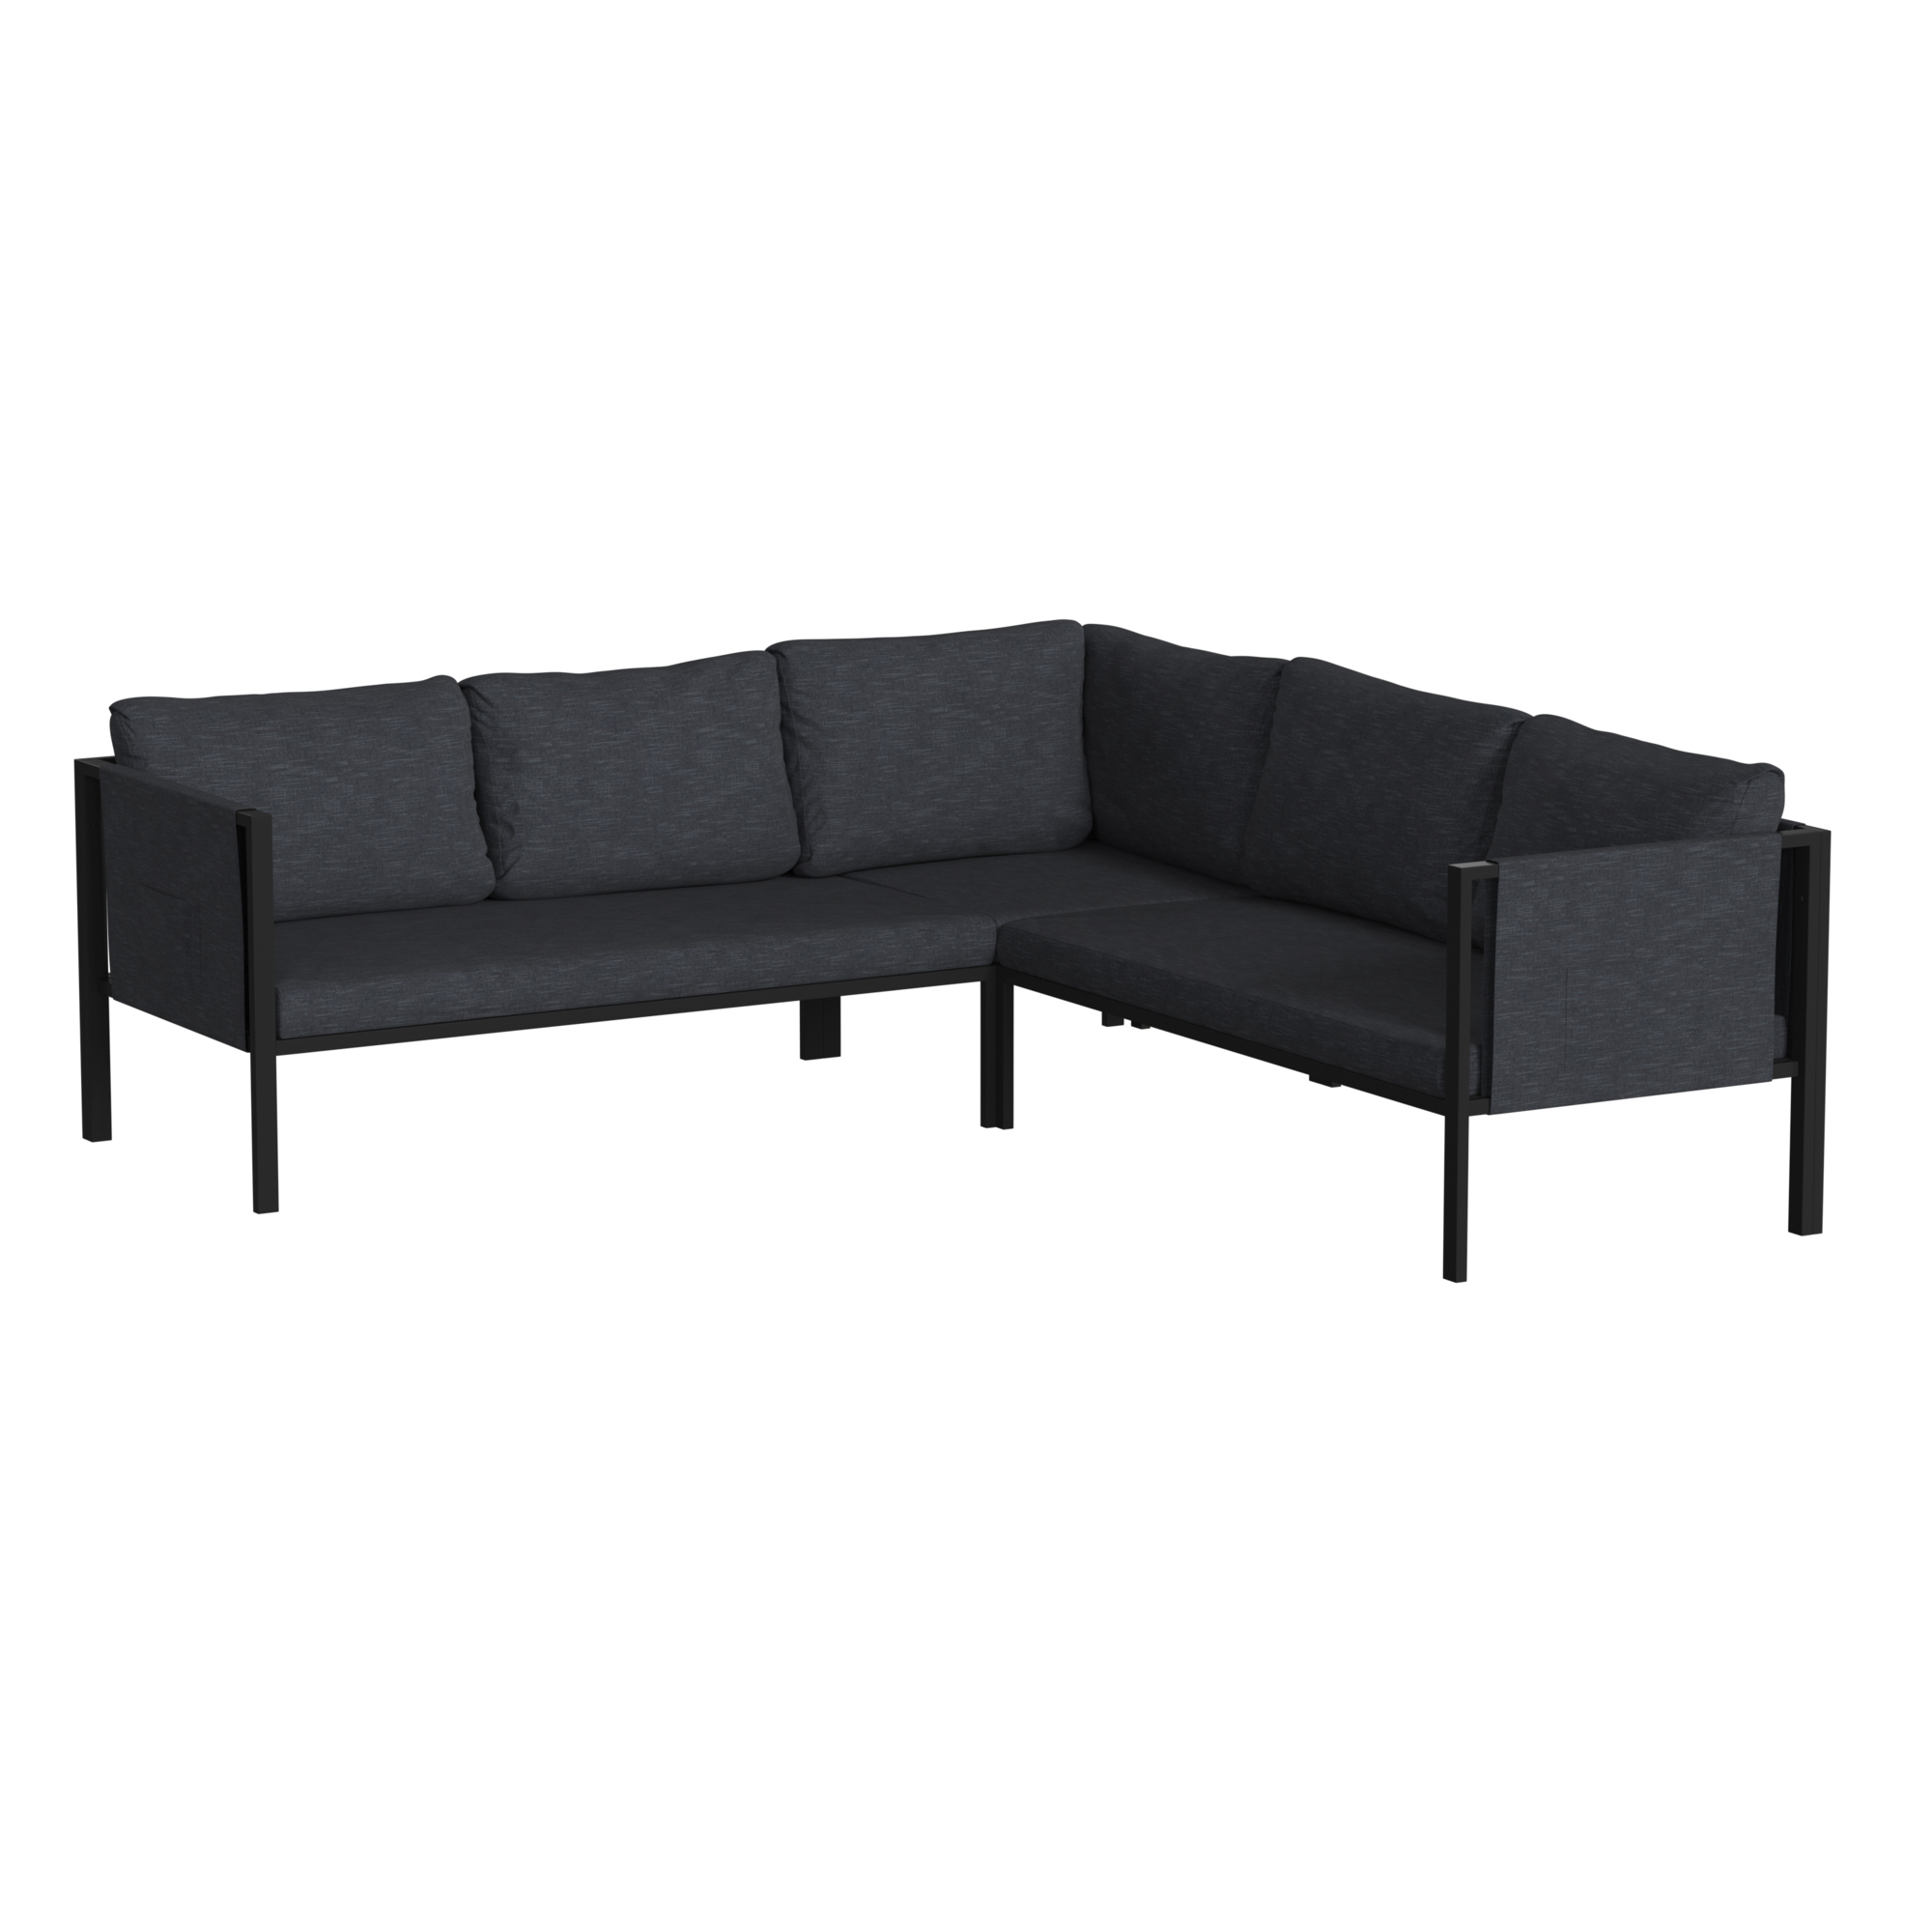 Flash Furniture, Black Sectional with Storage Charcoal Cushions, Primary Color Gray, Material Steel, Width 85.25 in, Model GM201108SECCH